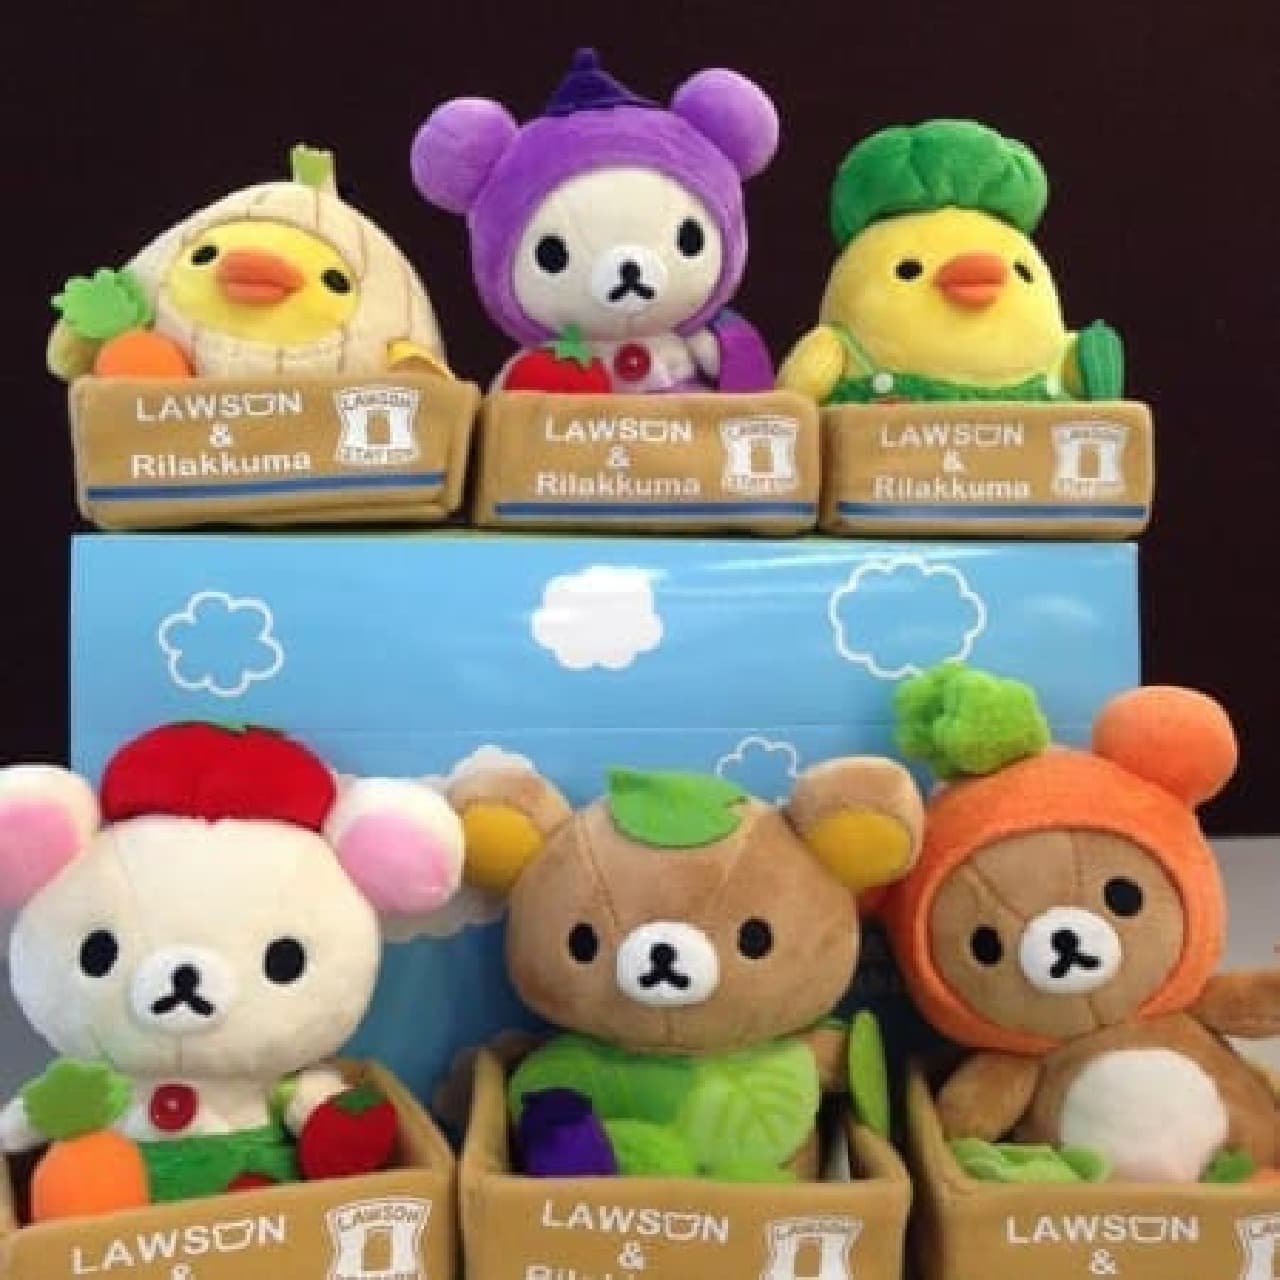 We will deliver "Vegetable Rilakkuma"! (Source: Lawson official Facebook page)